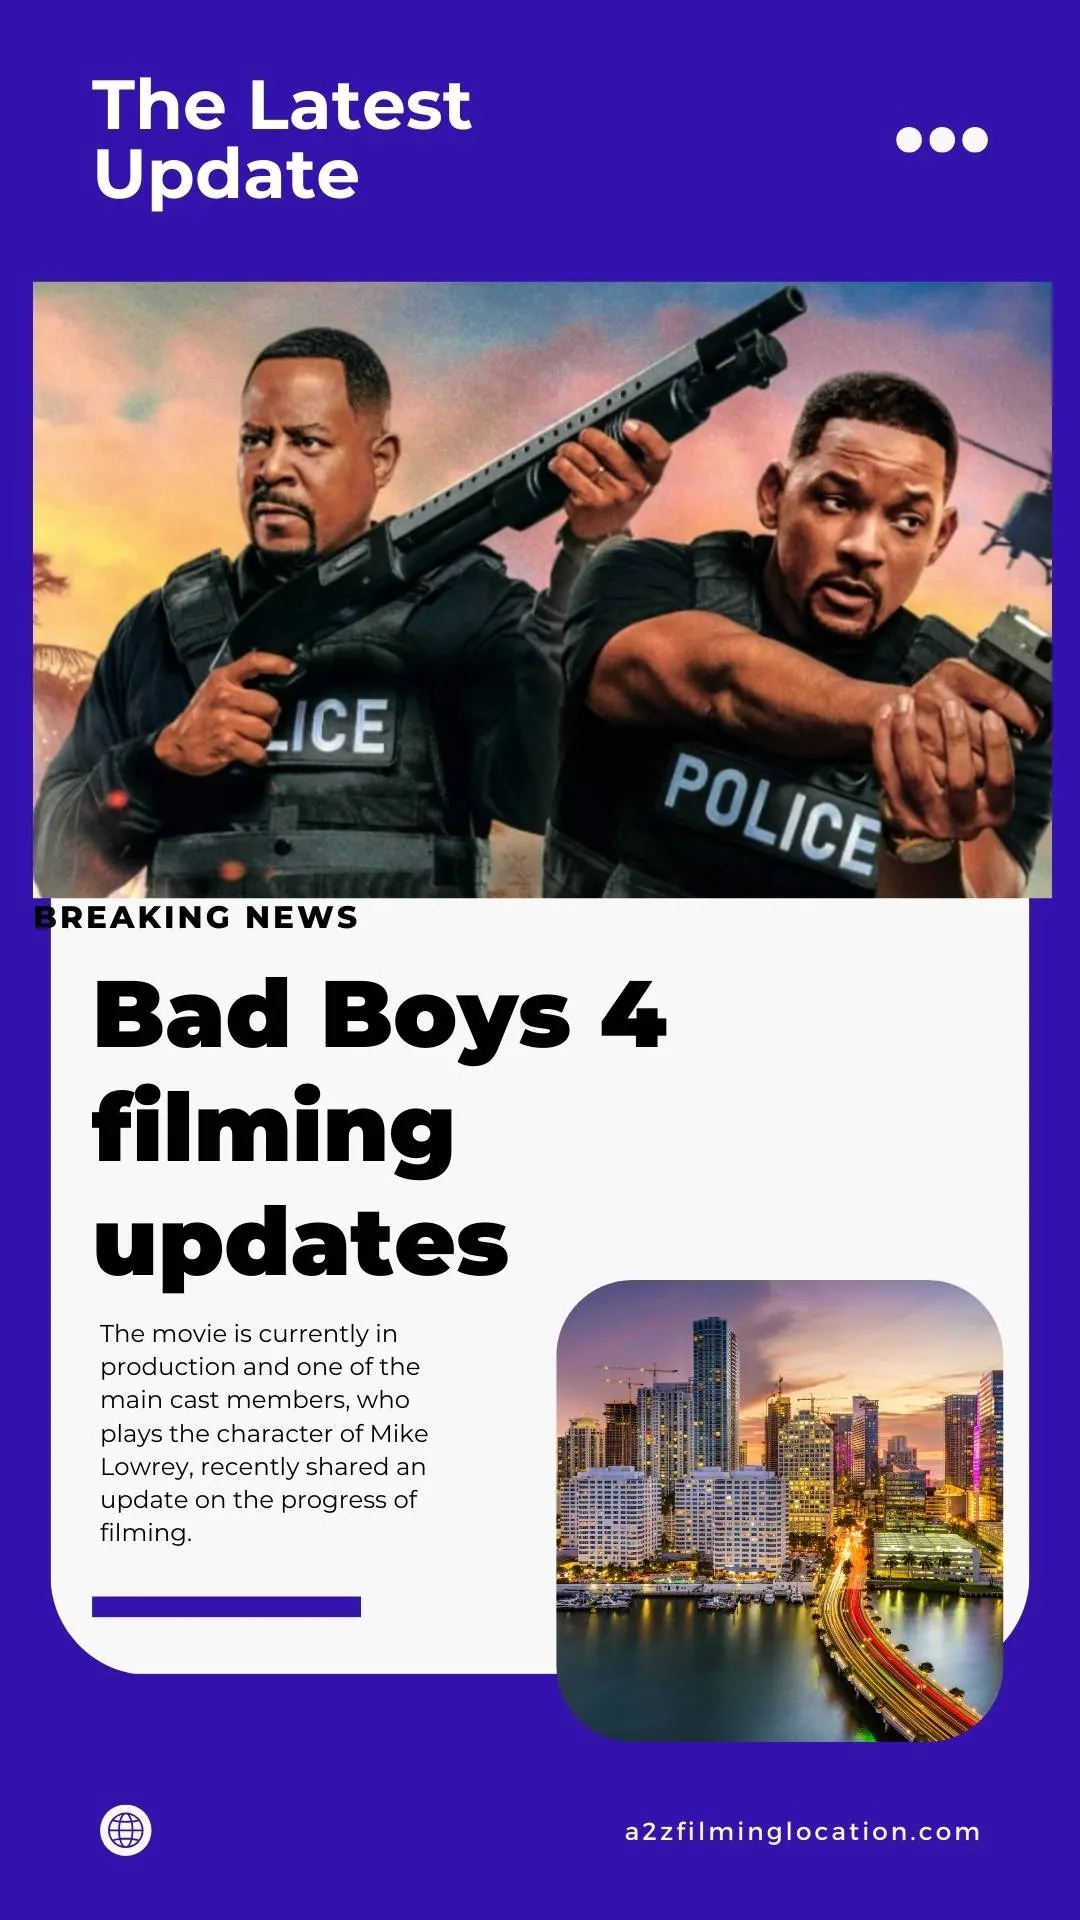 Will Smith updates Bad Boys 4 filming in a new video